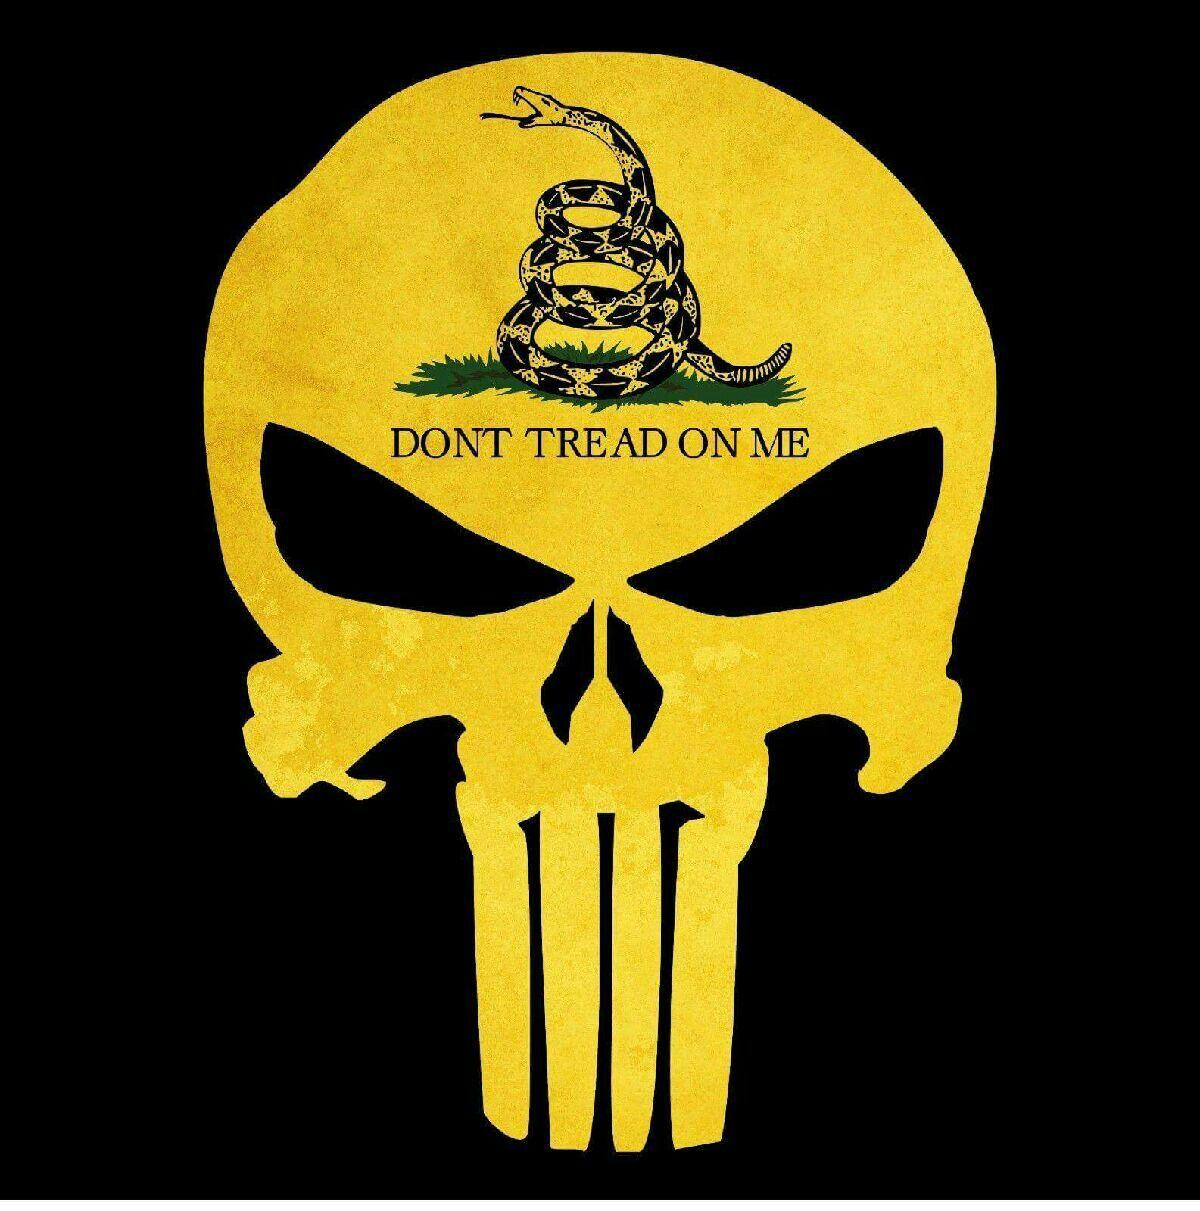 Don't tread on me!!!. Joey's place. Dont tread on me